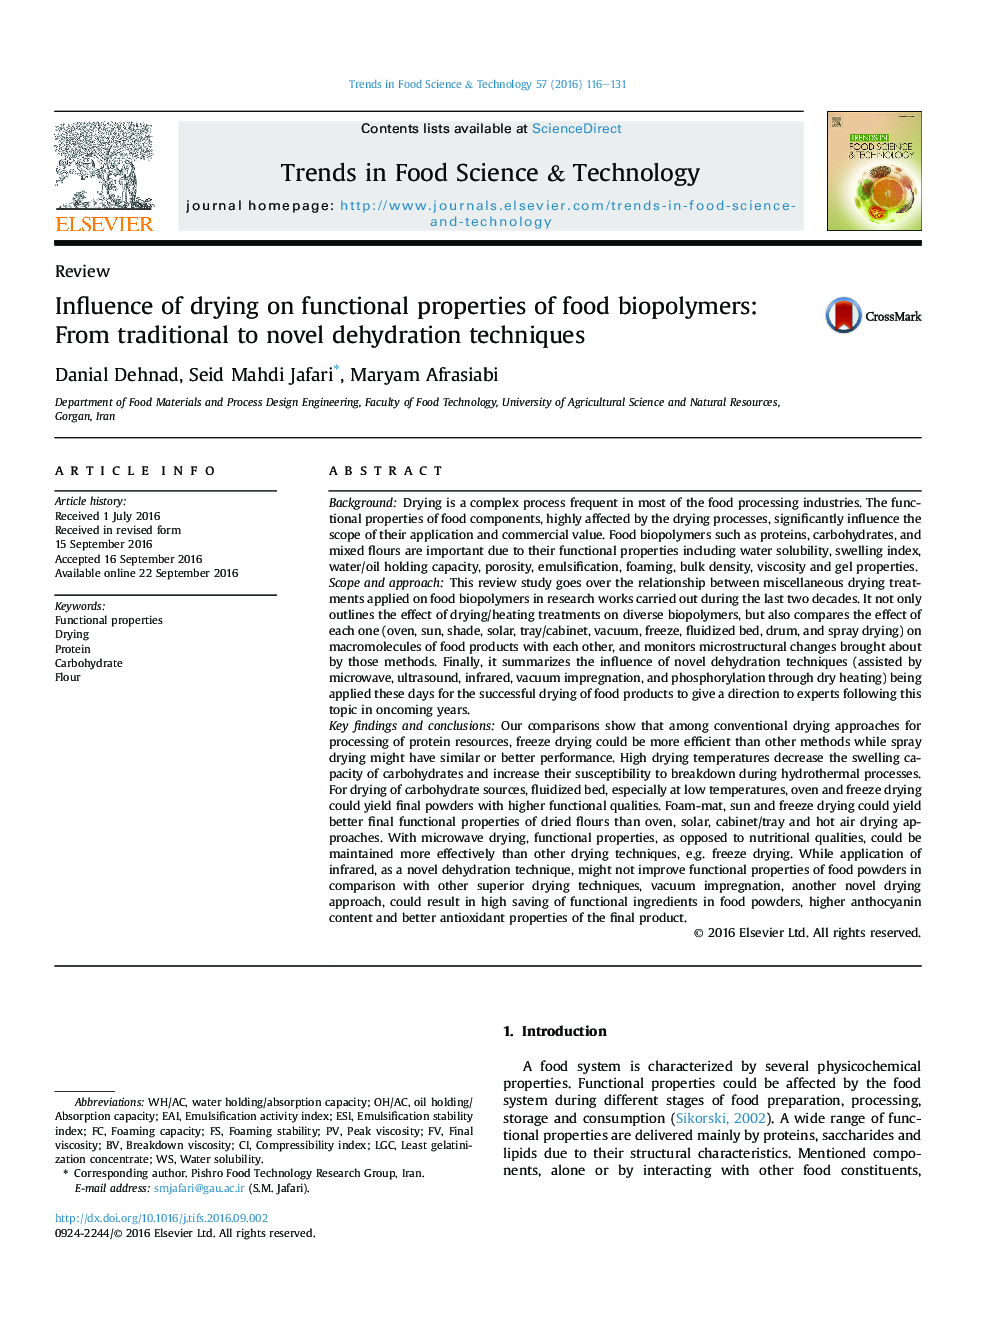 ReviewInfluence of drying on functional properties of food biopolymers: From traditional to novel dehydration techniques